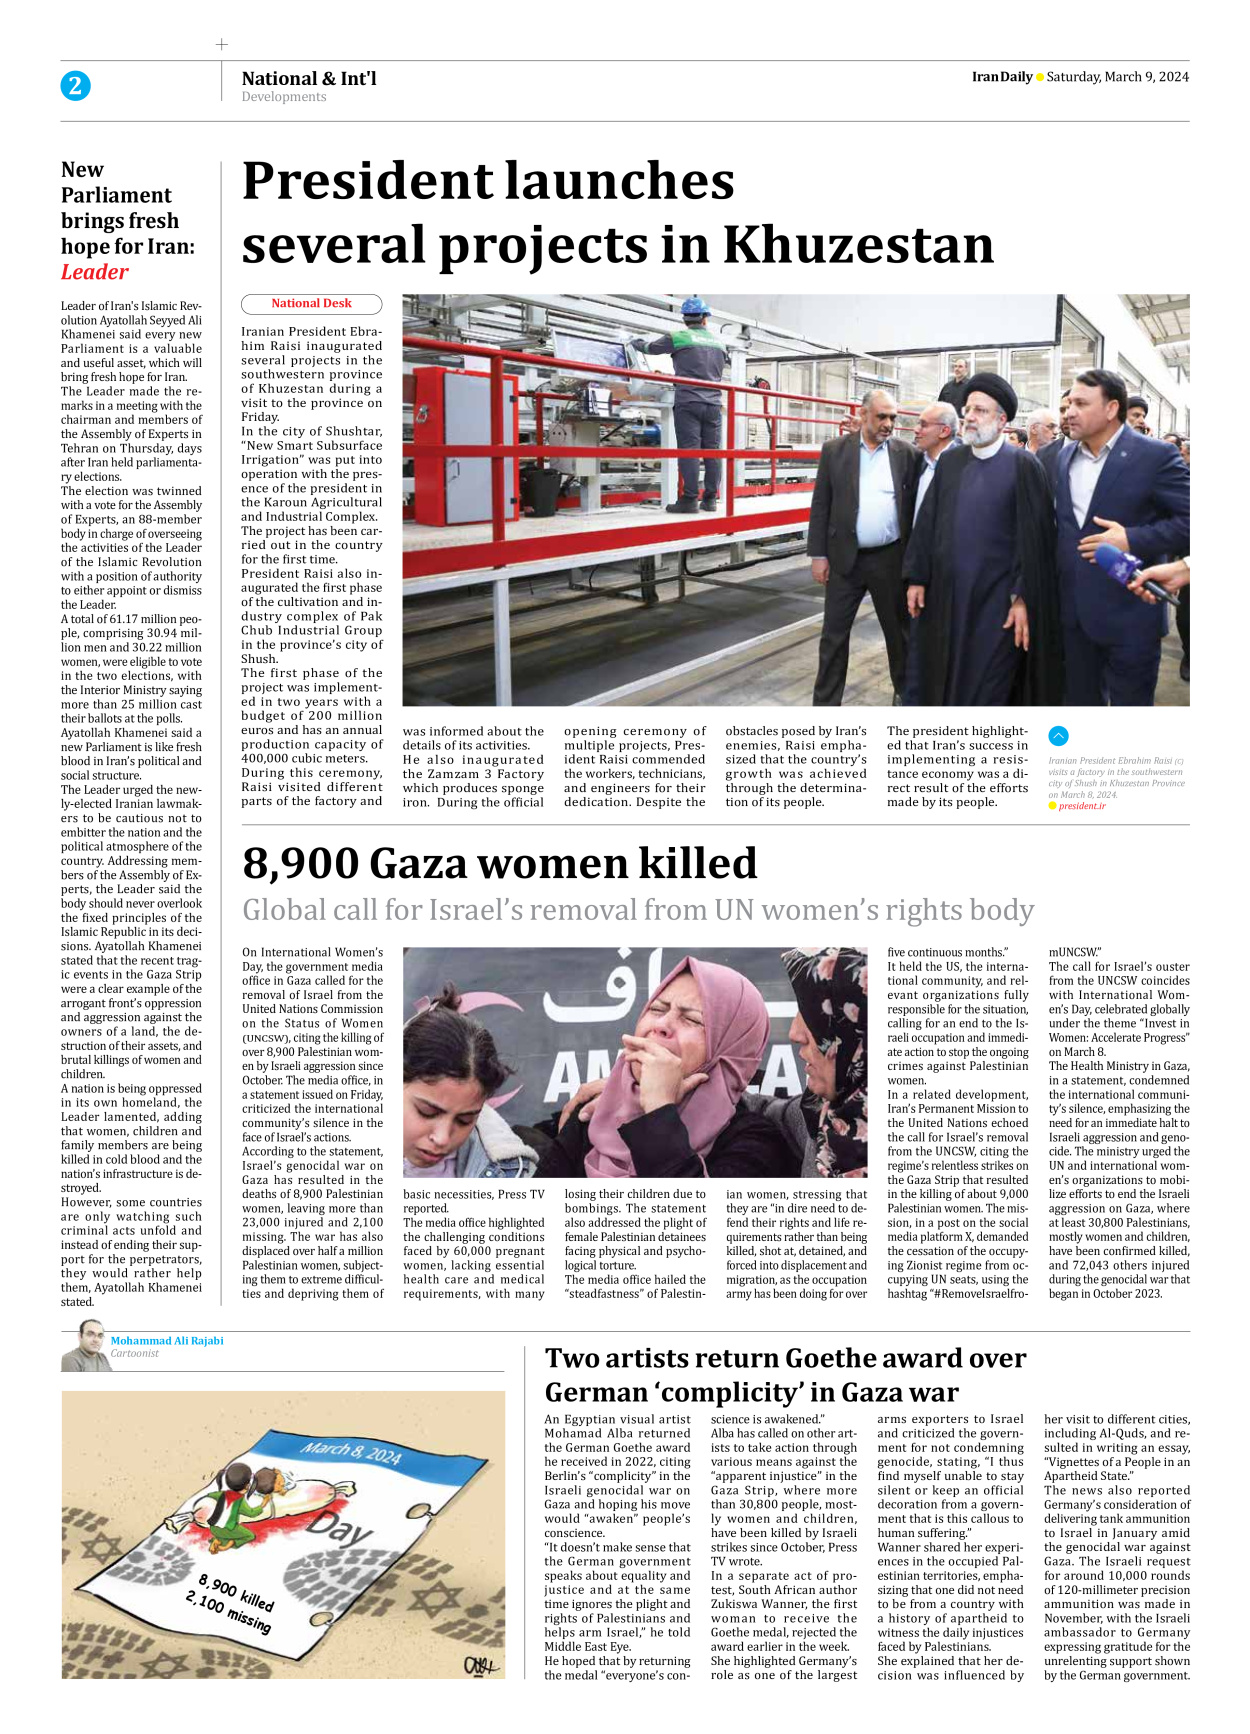 Iran Daily - Number Seven Thousand Five Hundred and Twenty Five - 09 March 2024 - Page 2